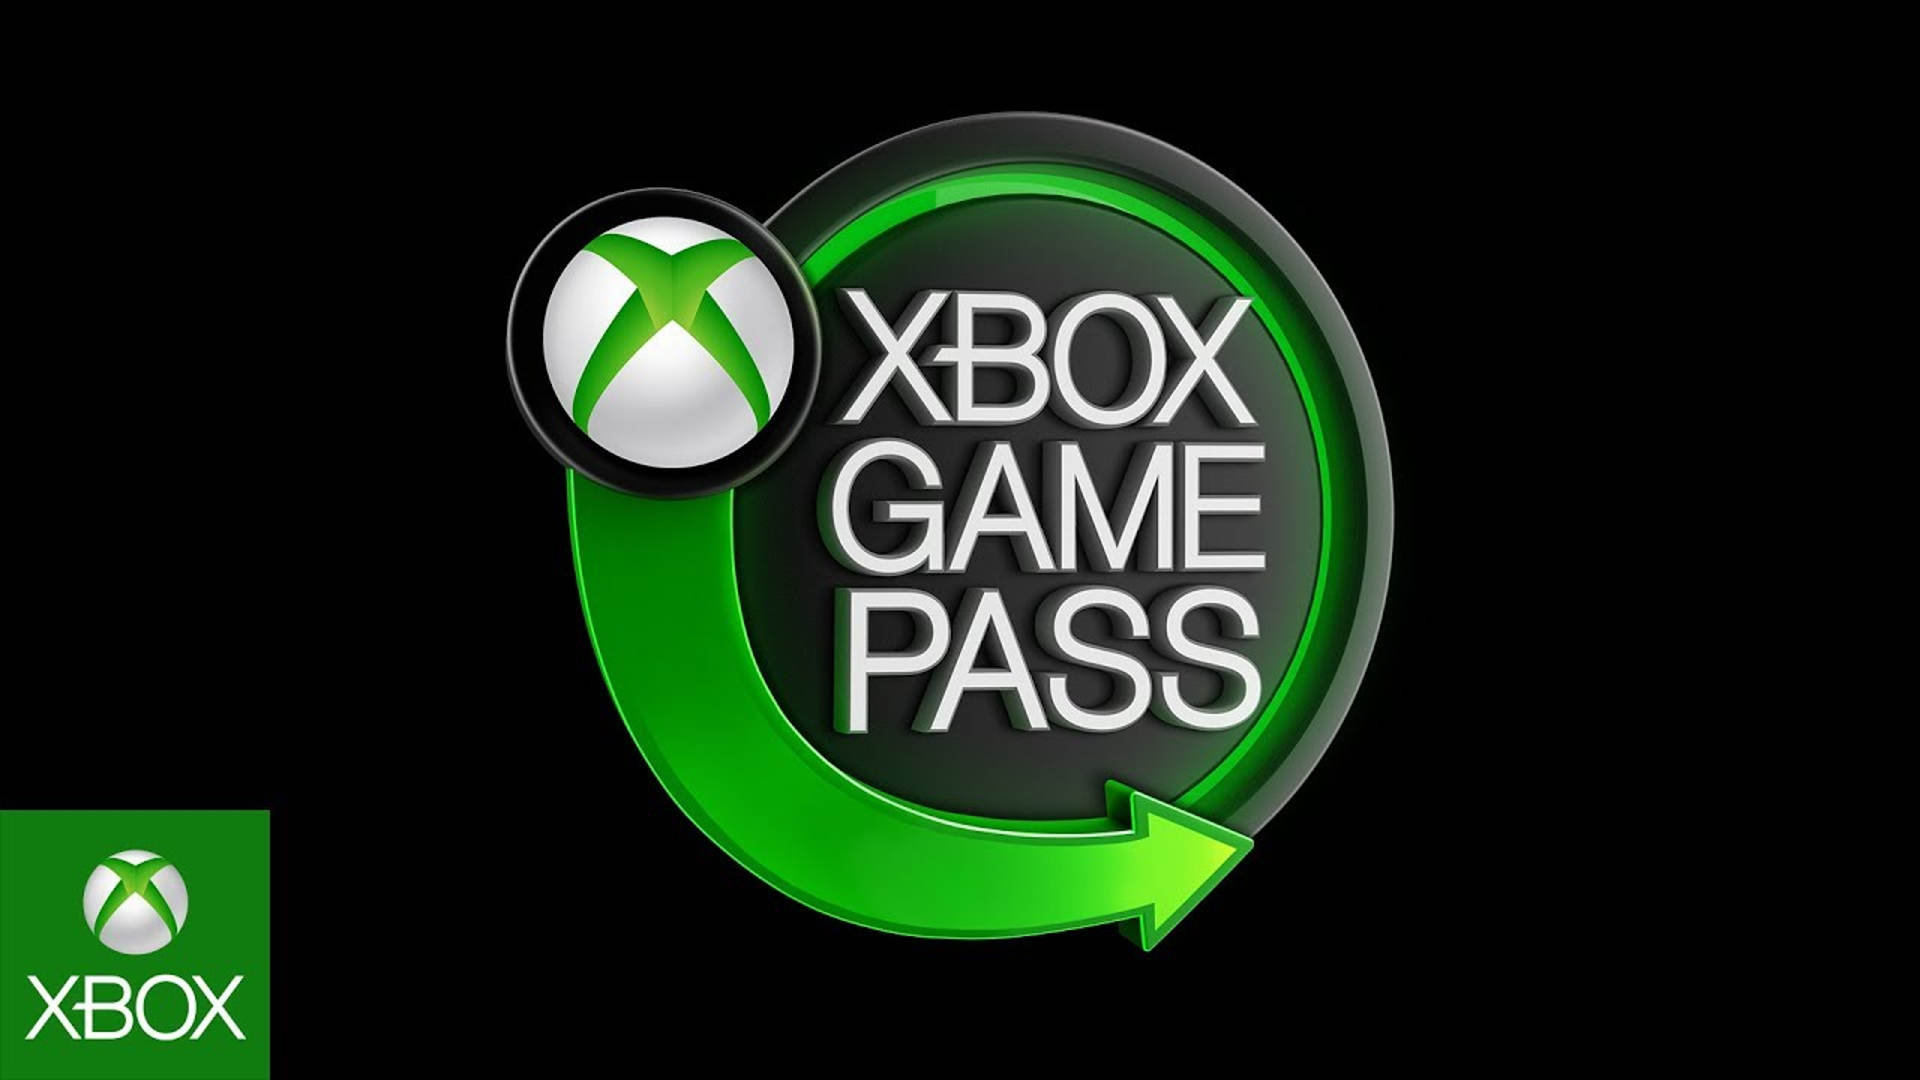 is xbox game pass still 1 dollar for the first month